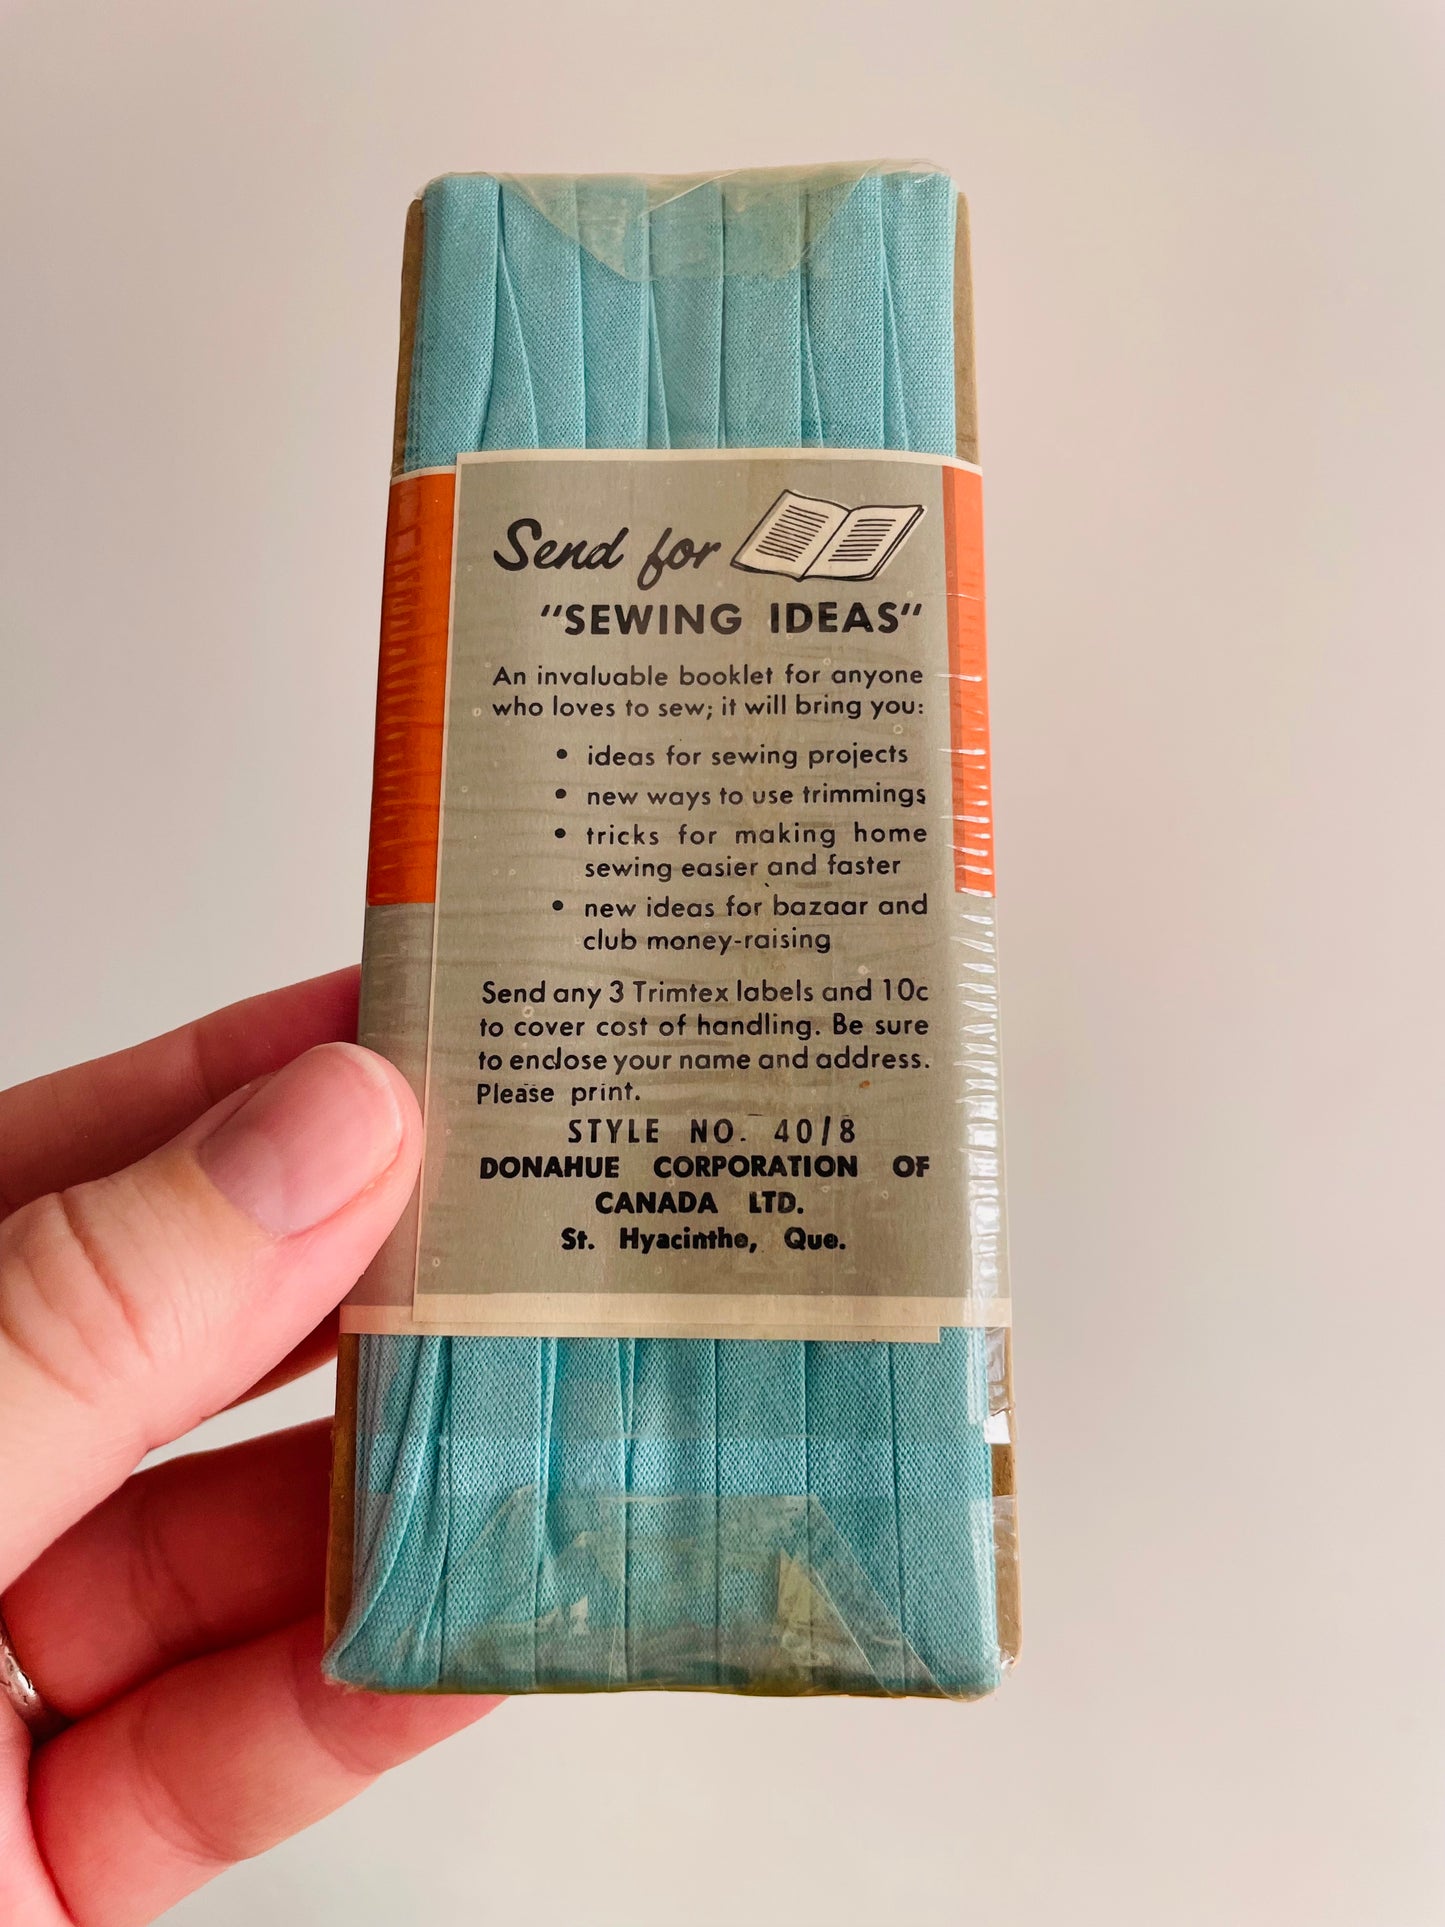 Shades of Blue Trimtex & Corticelli Double Fold Bias Tape - Brand New Vintage in Original Packaging - Set of 5